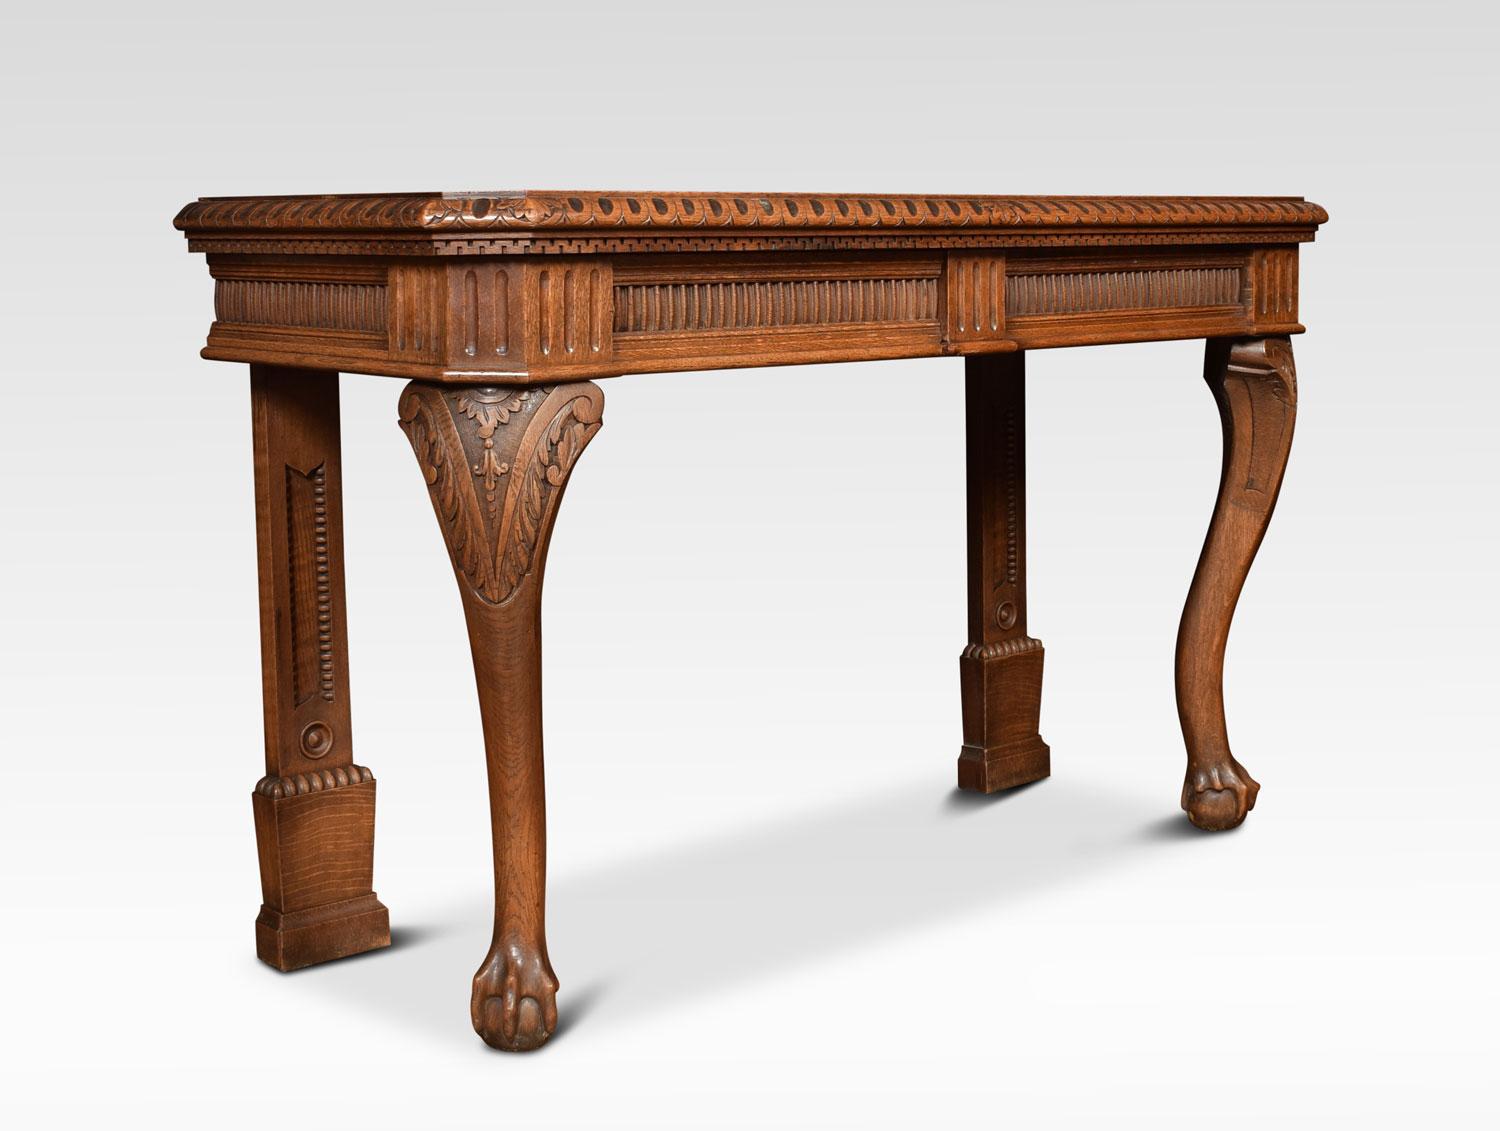 19th Century Carved Oak Console Table